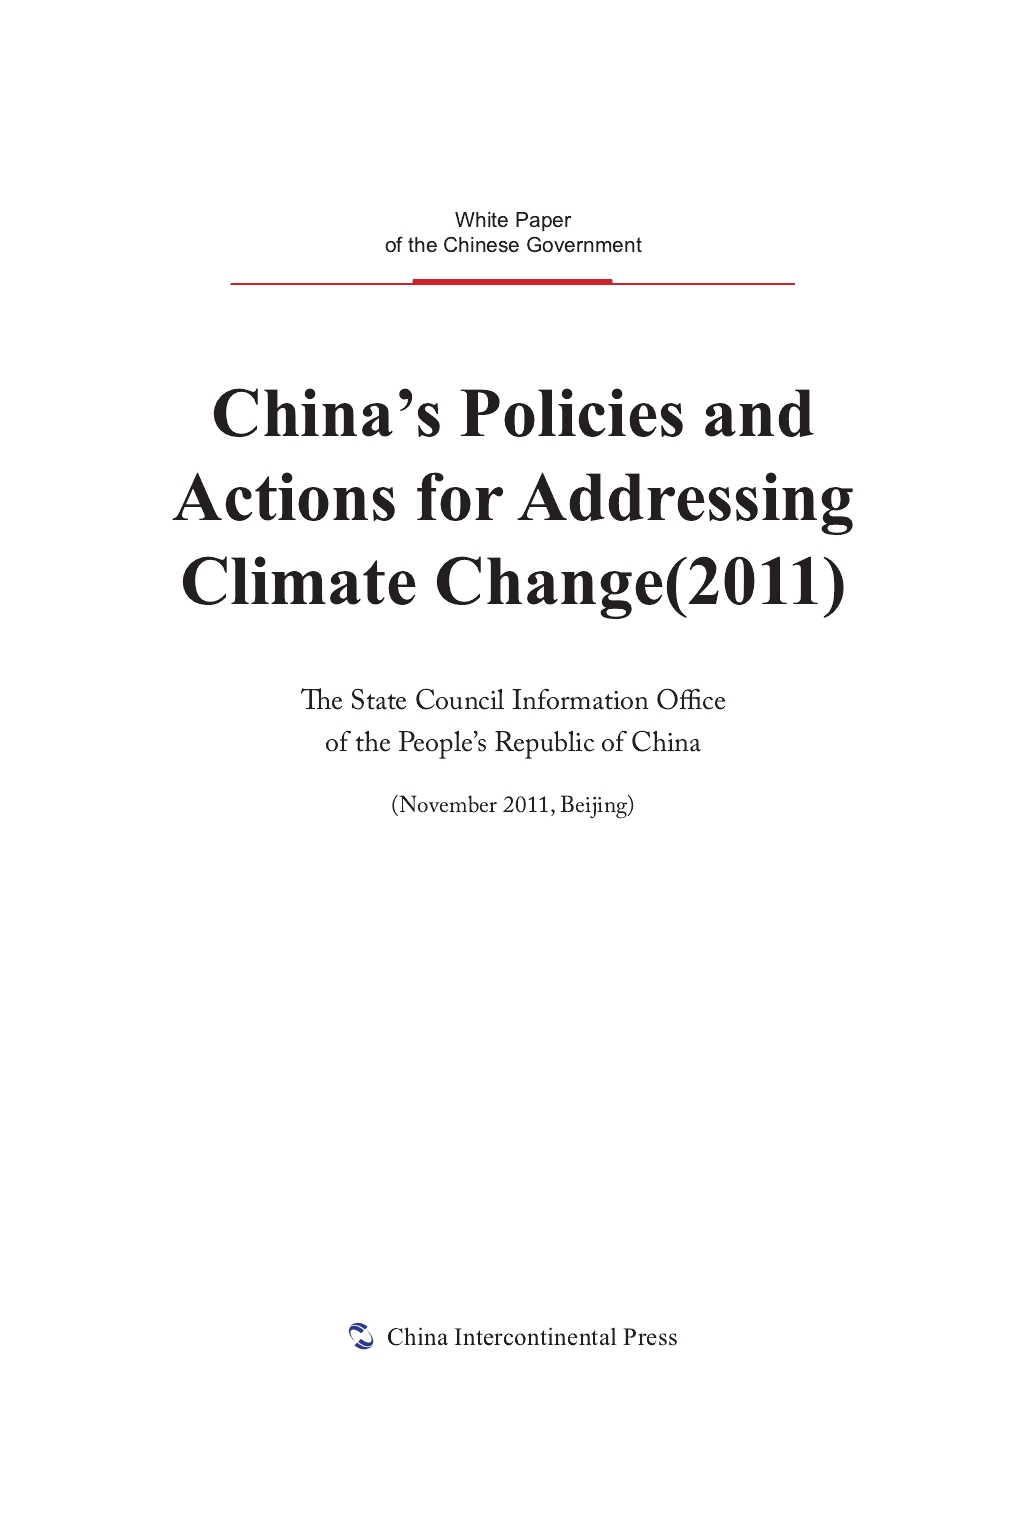 China's Policies and Actions for Addressing Climate Change(2011)